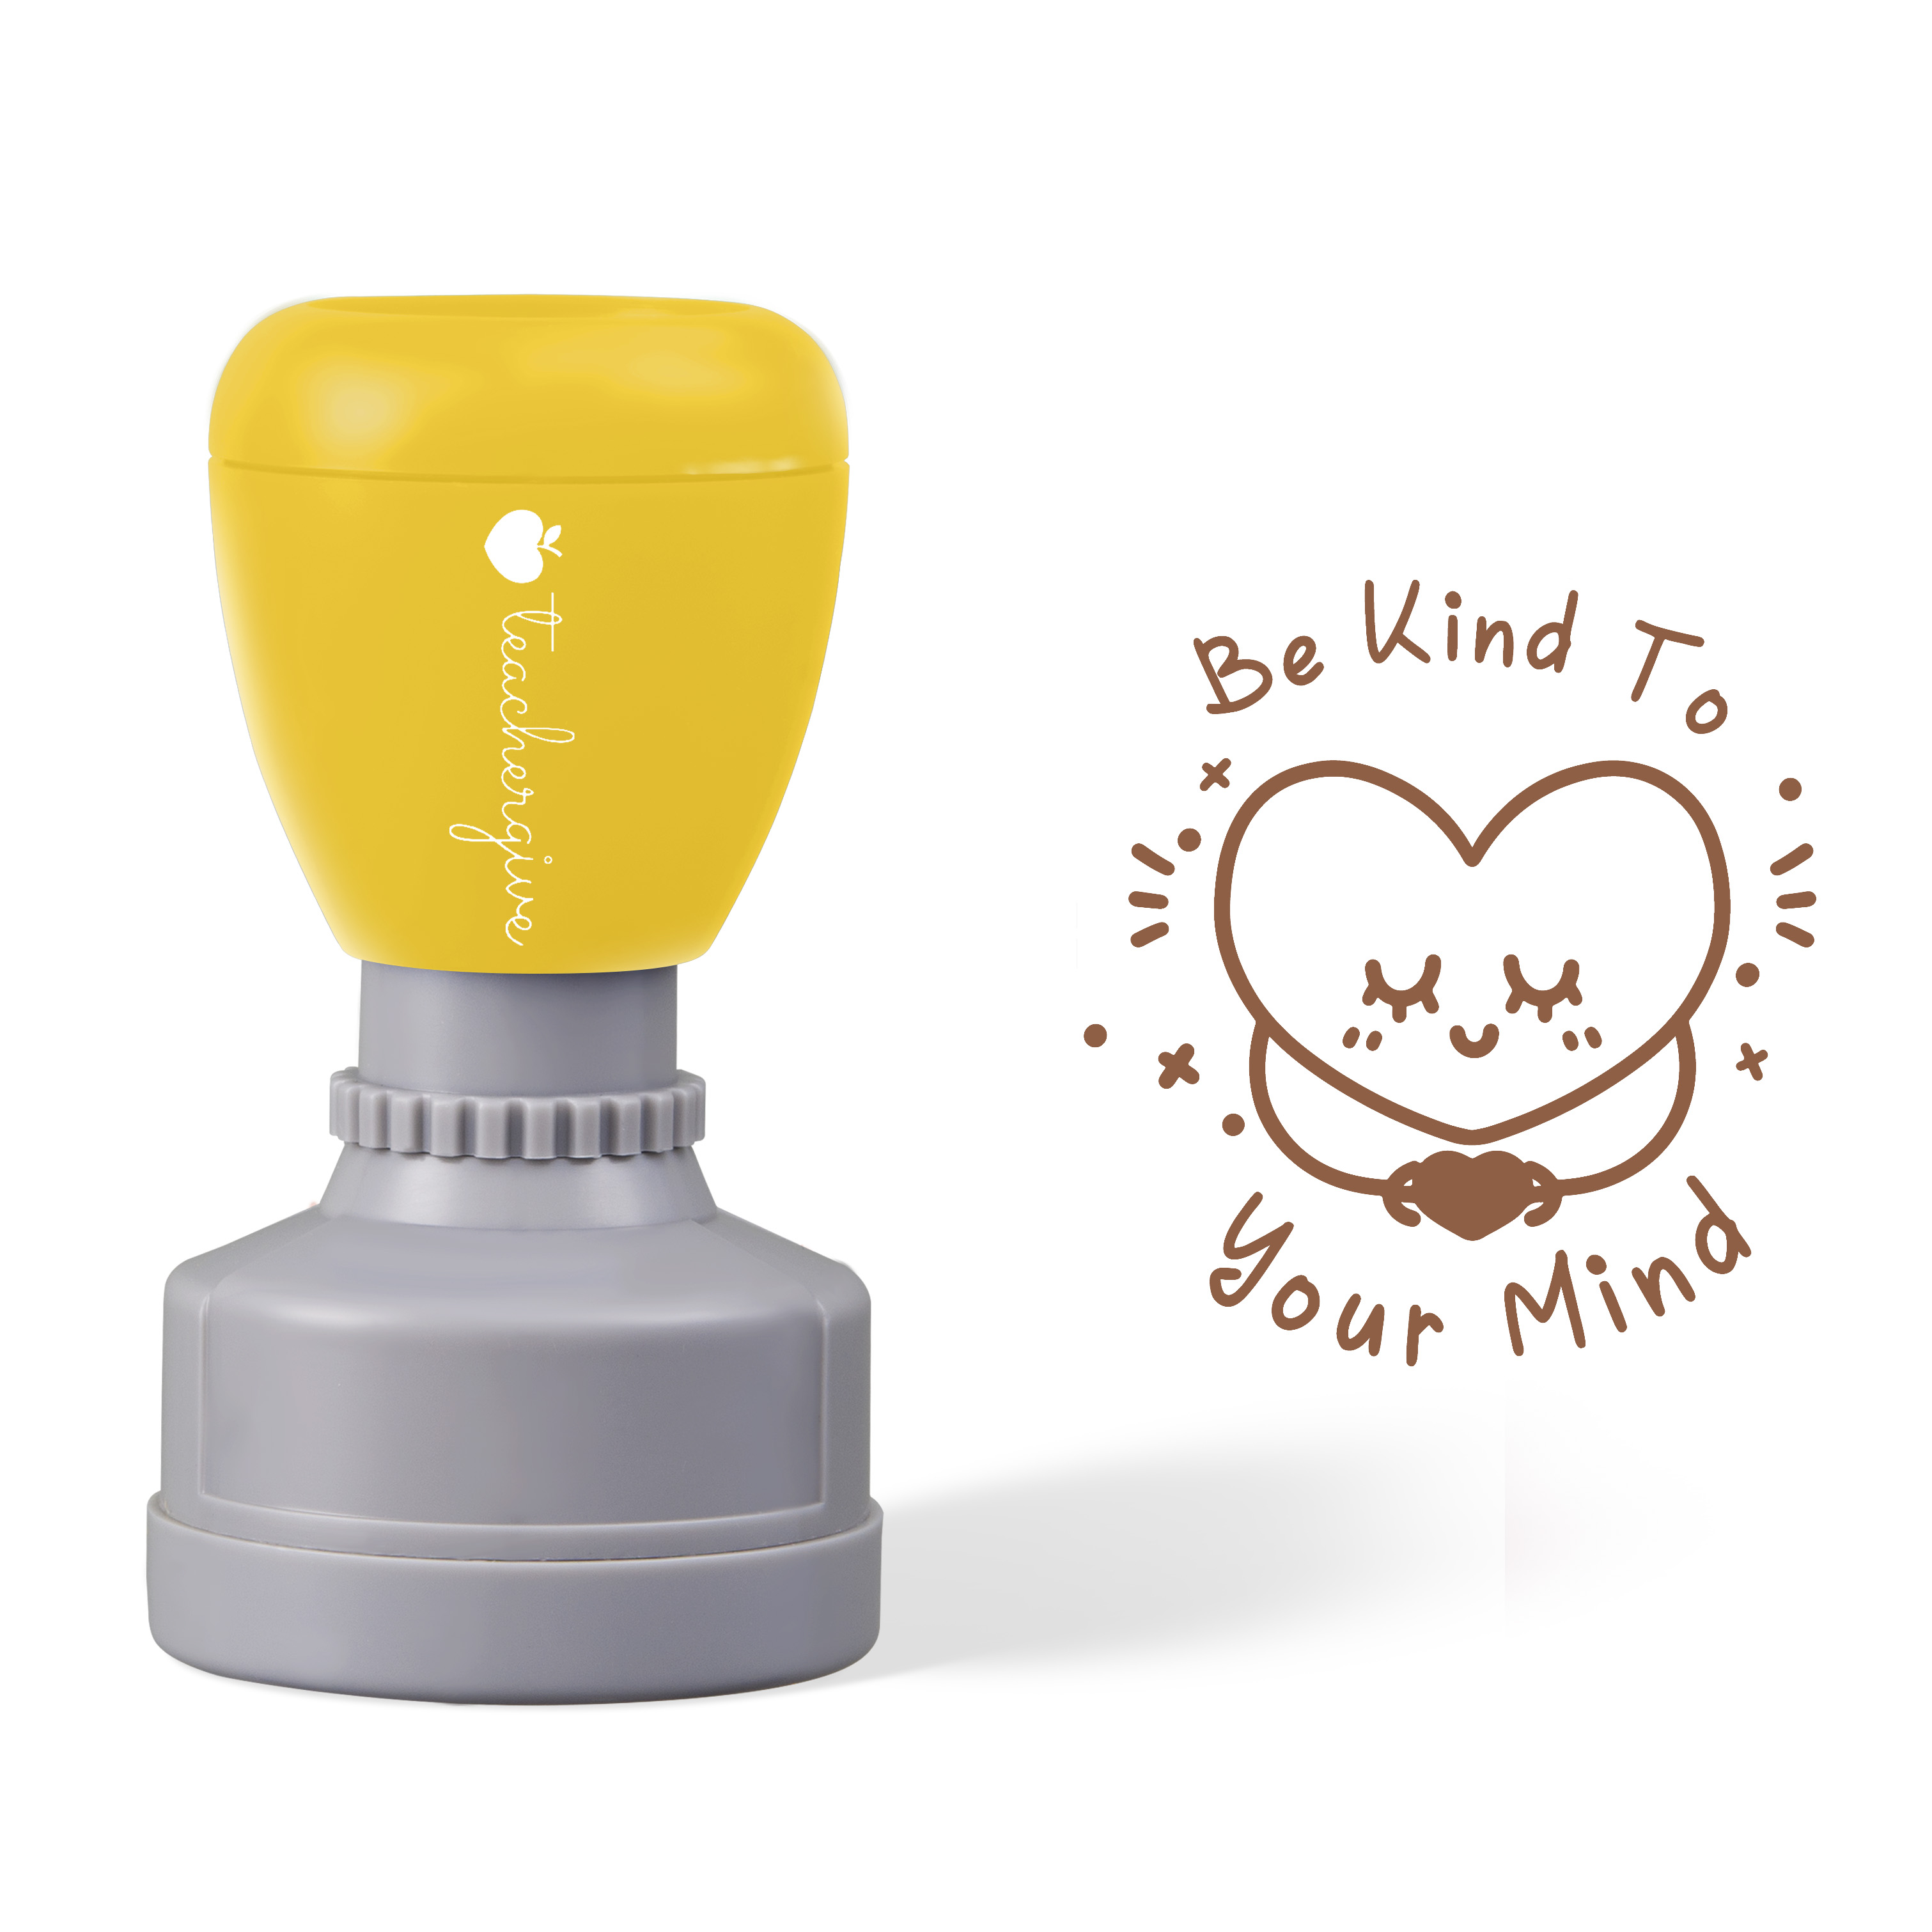 Be Kind To Your Mind Stamp